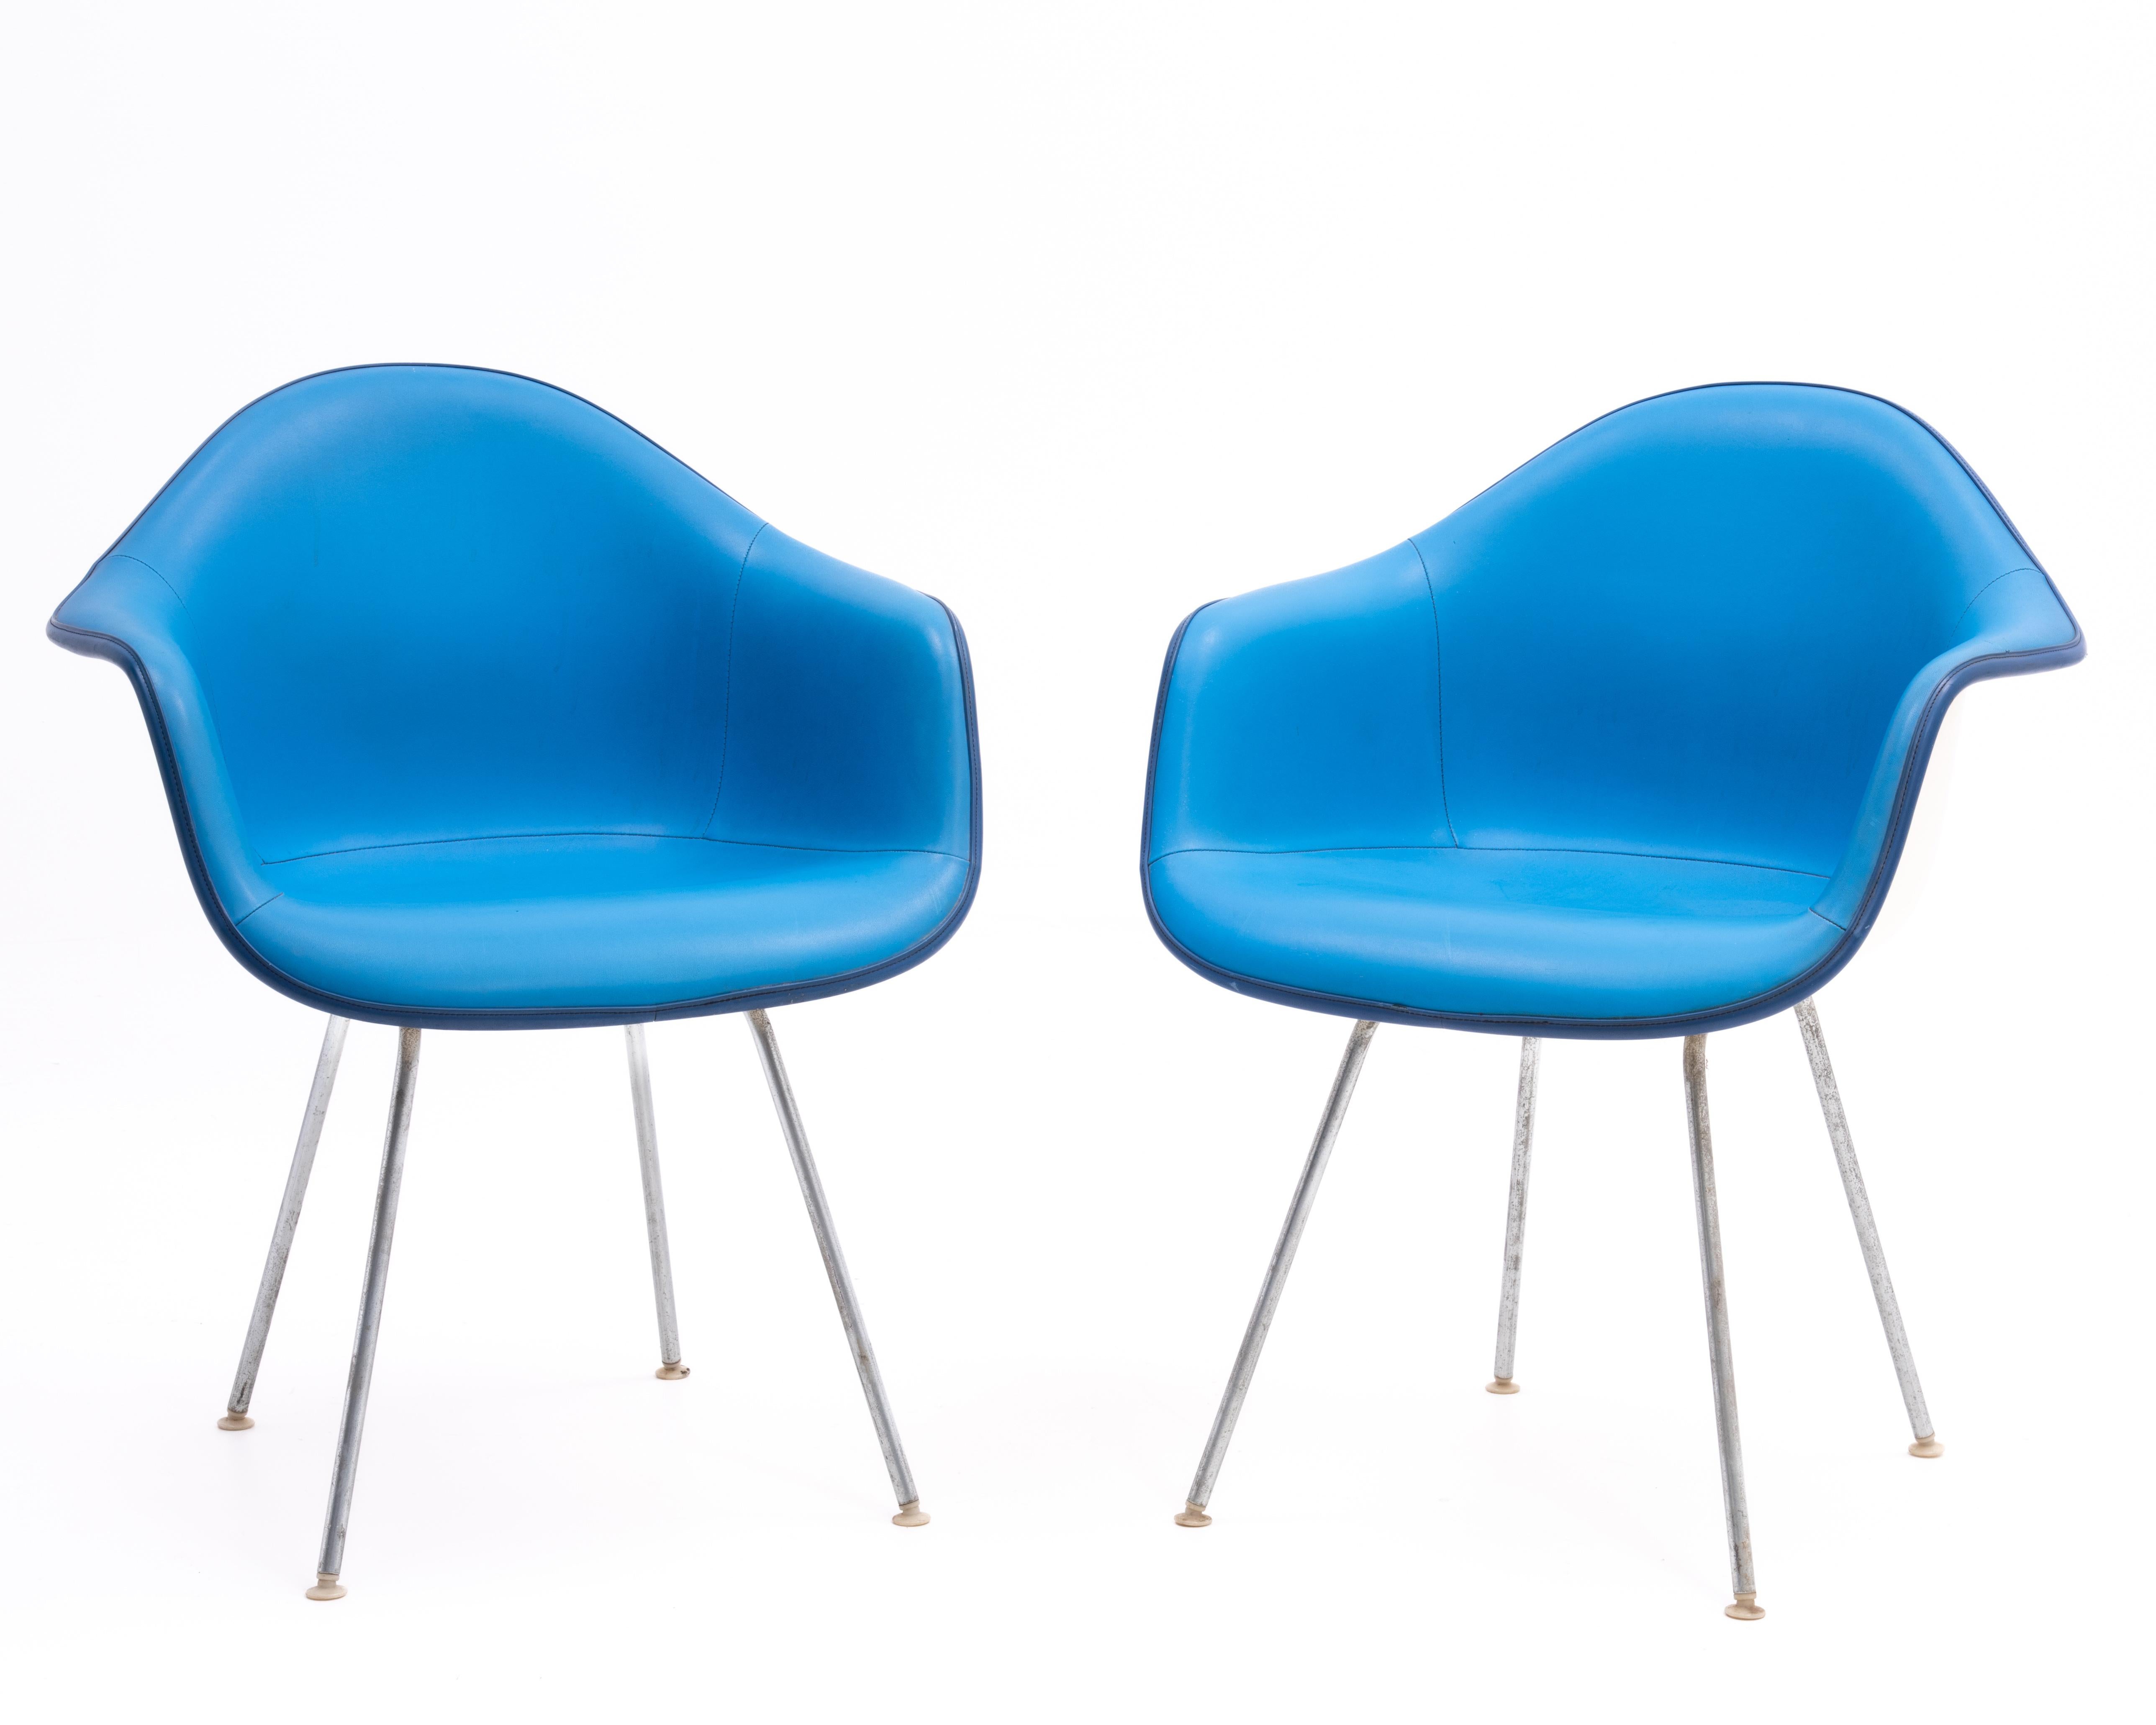 A pair of fiberglass arm shell chair designed by Ray & Charles Eames and produced by Herman Miller in 1972. The white shells contrast nicely with cerulean blue seats and royal blue piping. The white shell and contrasting seat is reminiscent of the